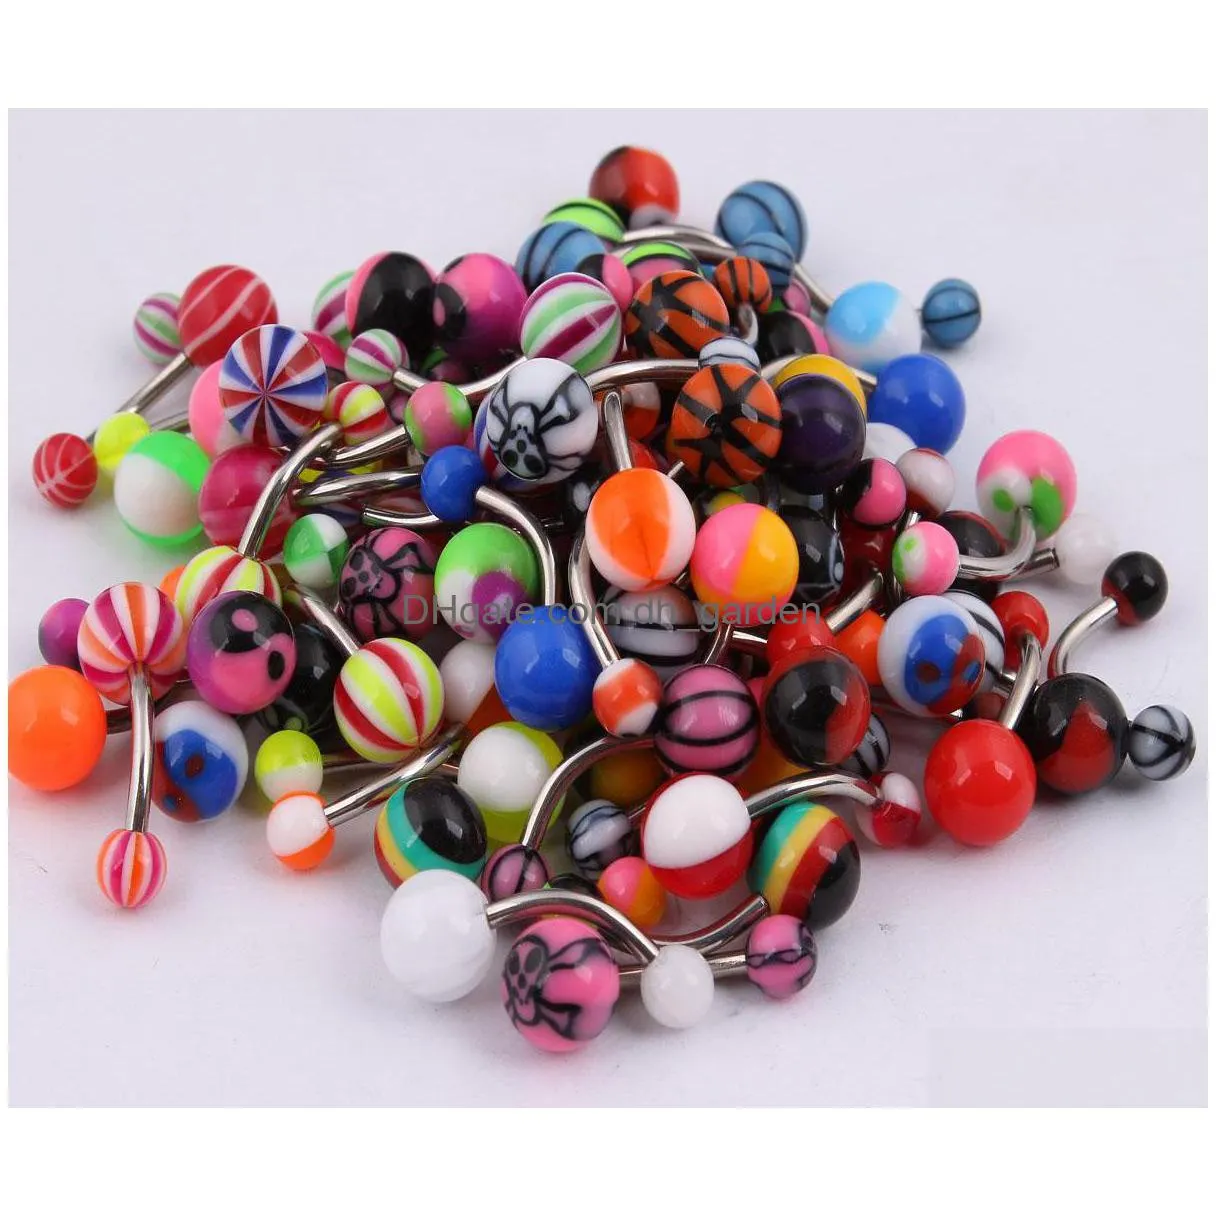 100pcs/lot body jewelry piercing eyebrow navel belly tongue lip bar rings mixed color